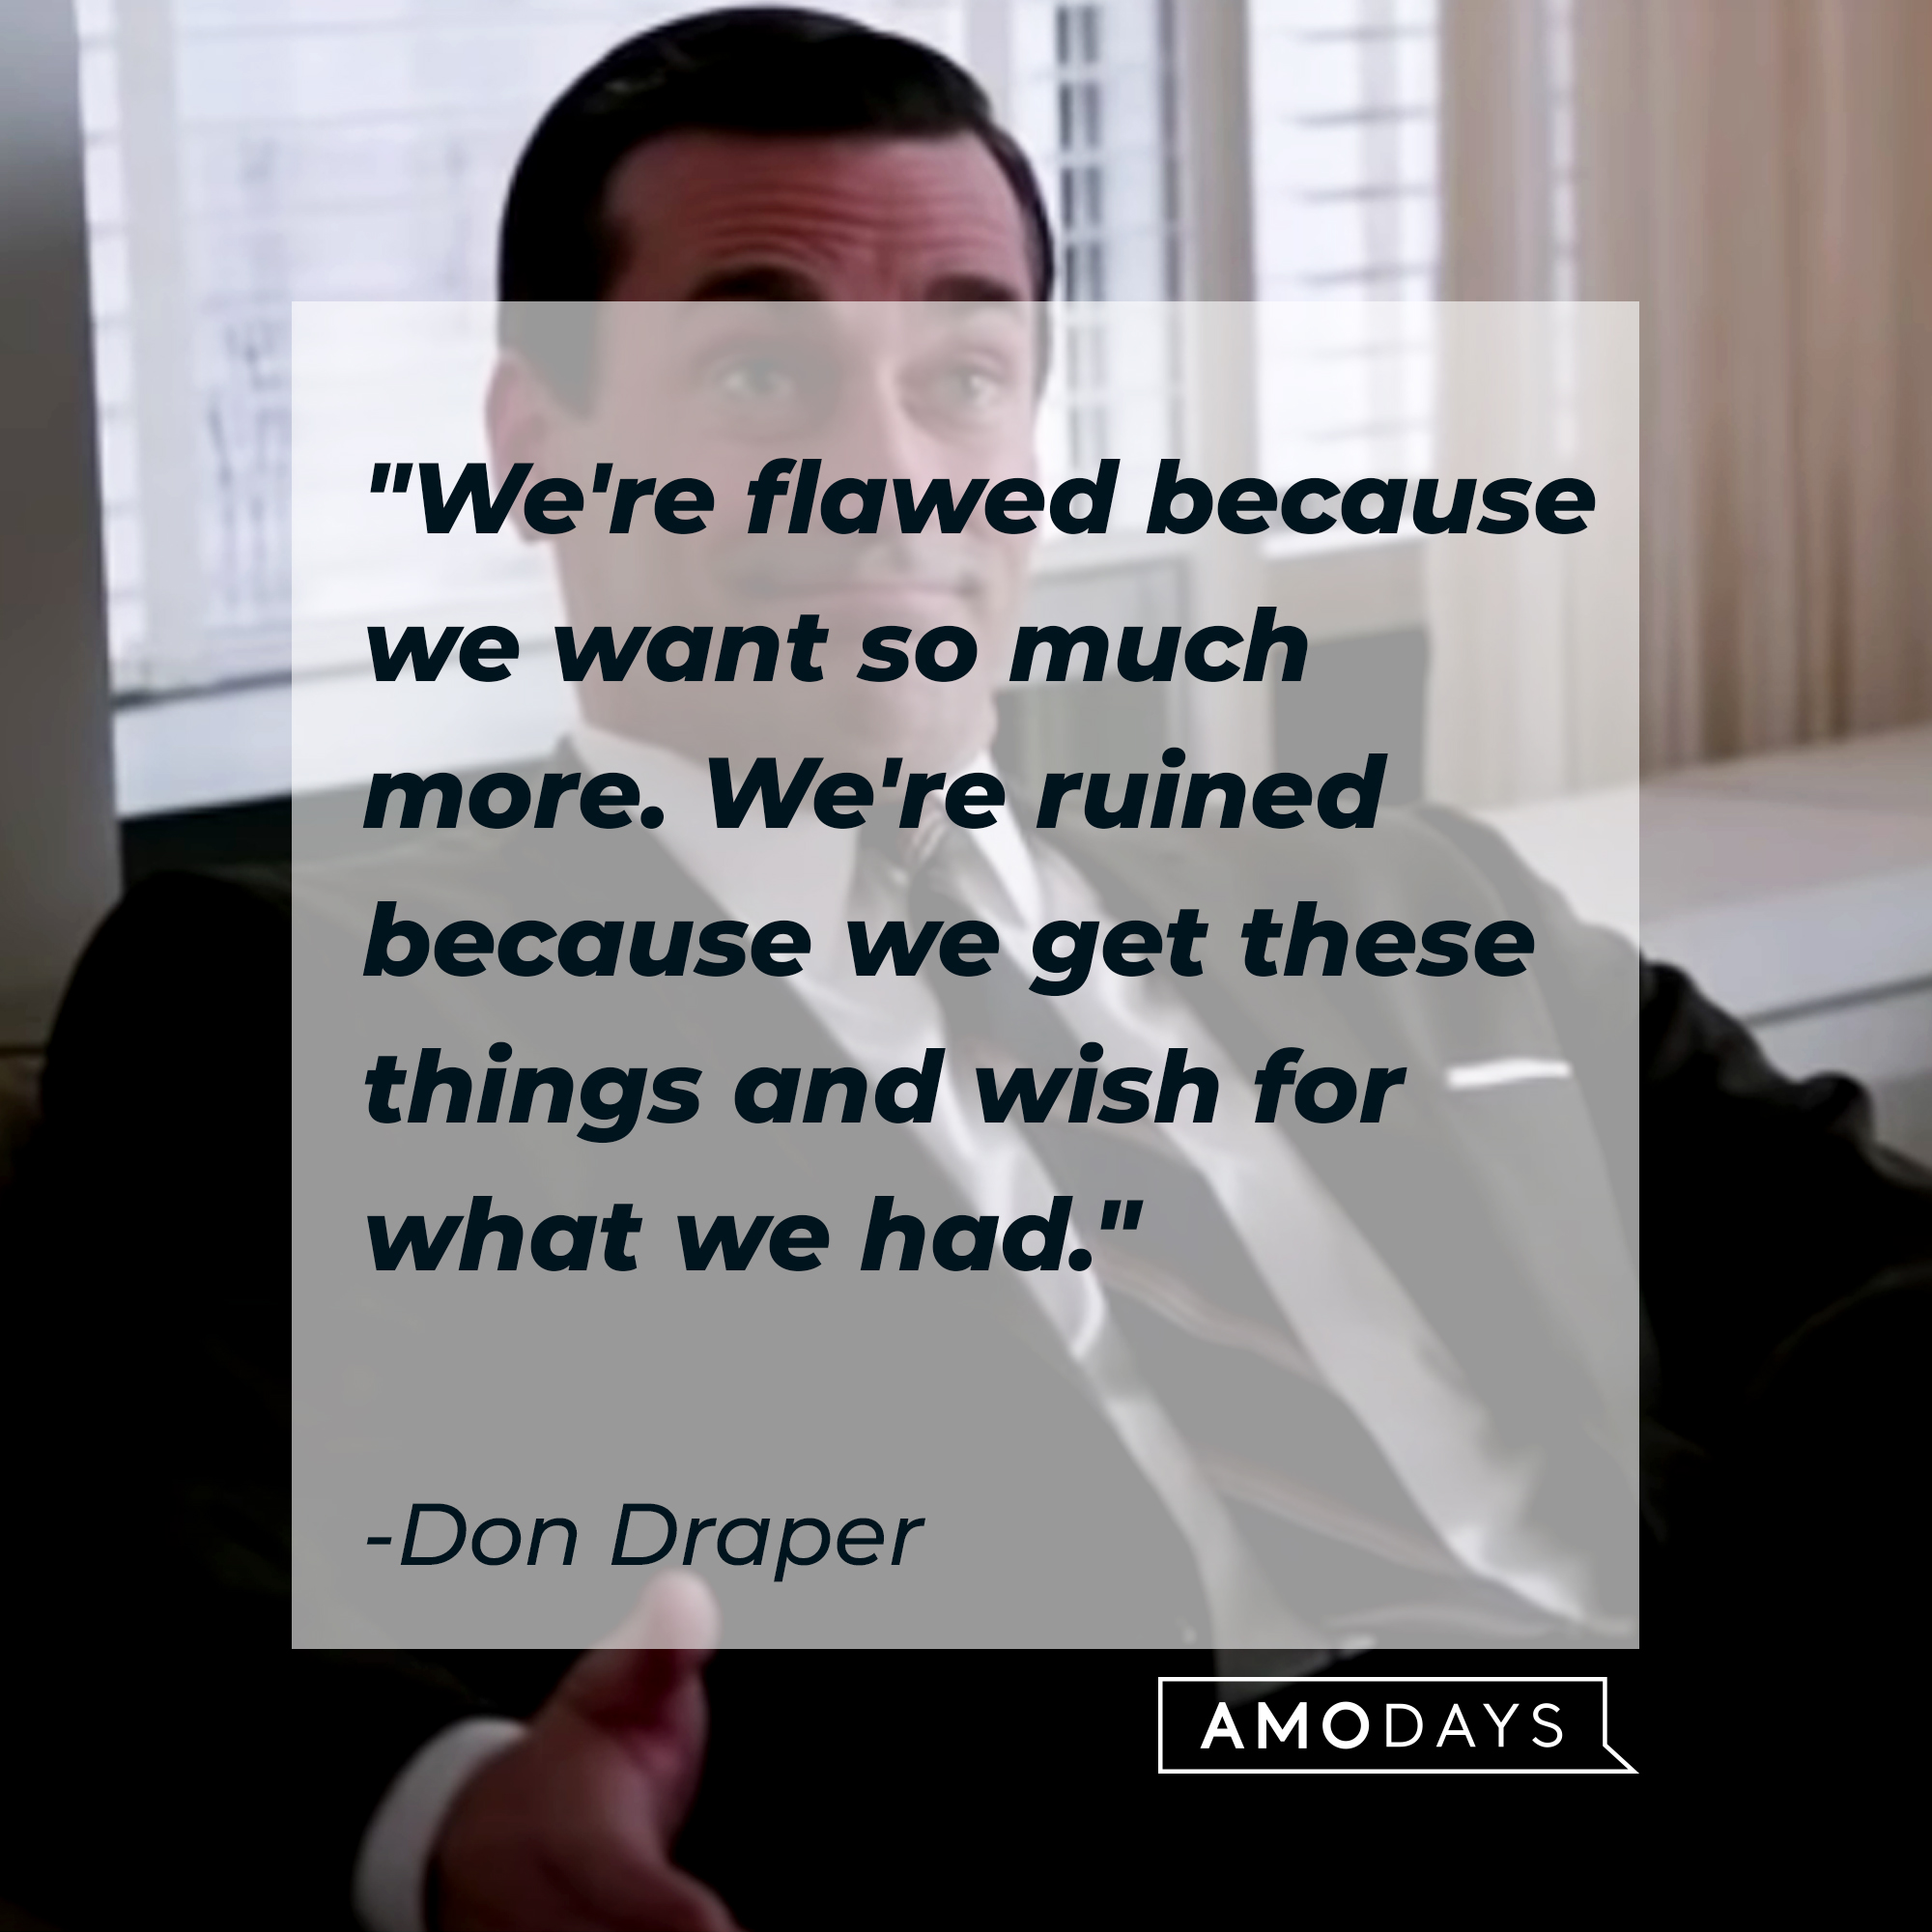 Don Draper's quote: "We're flawed because we want so much more. We're ruined because we get these things and wish for what we had." | Source: Facebook.com/MadMen